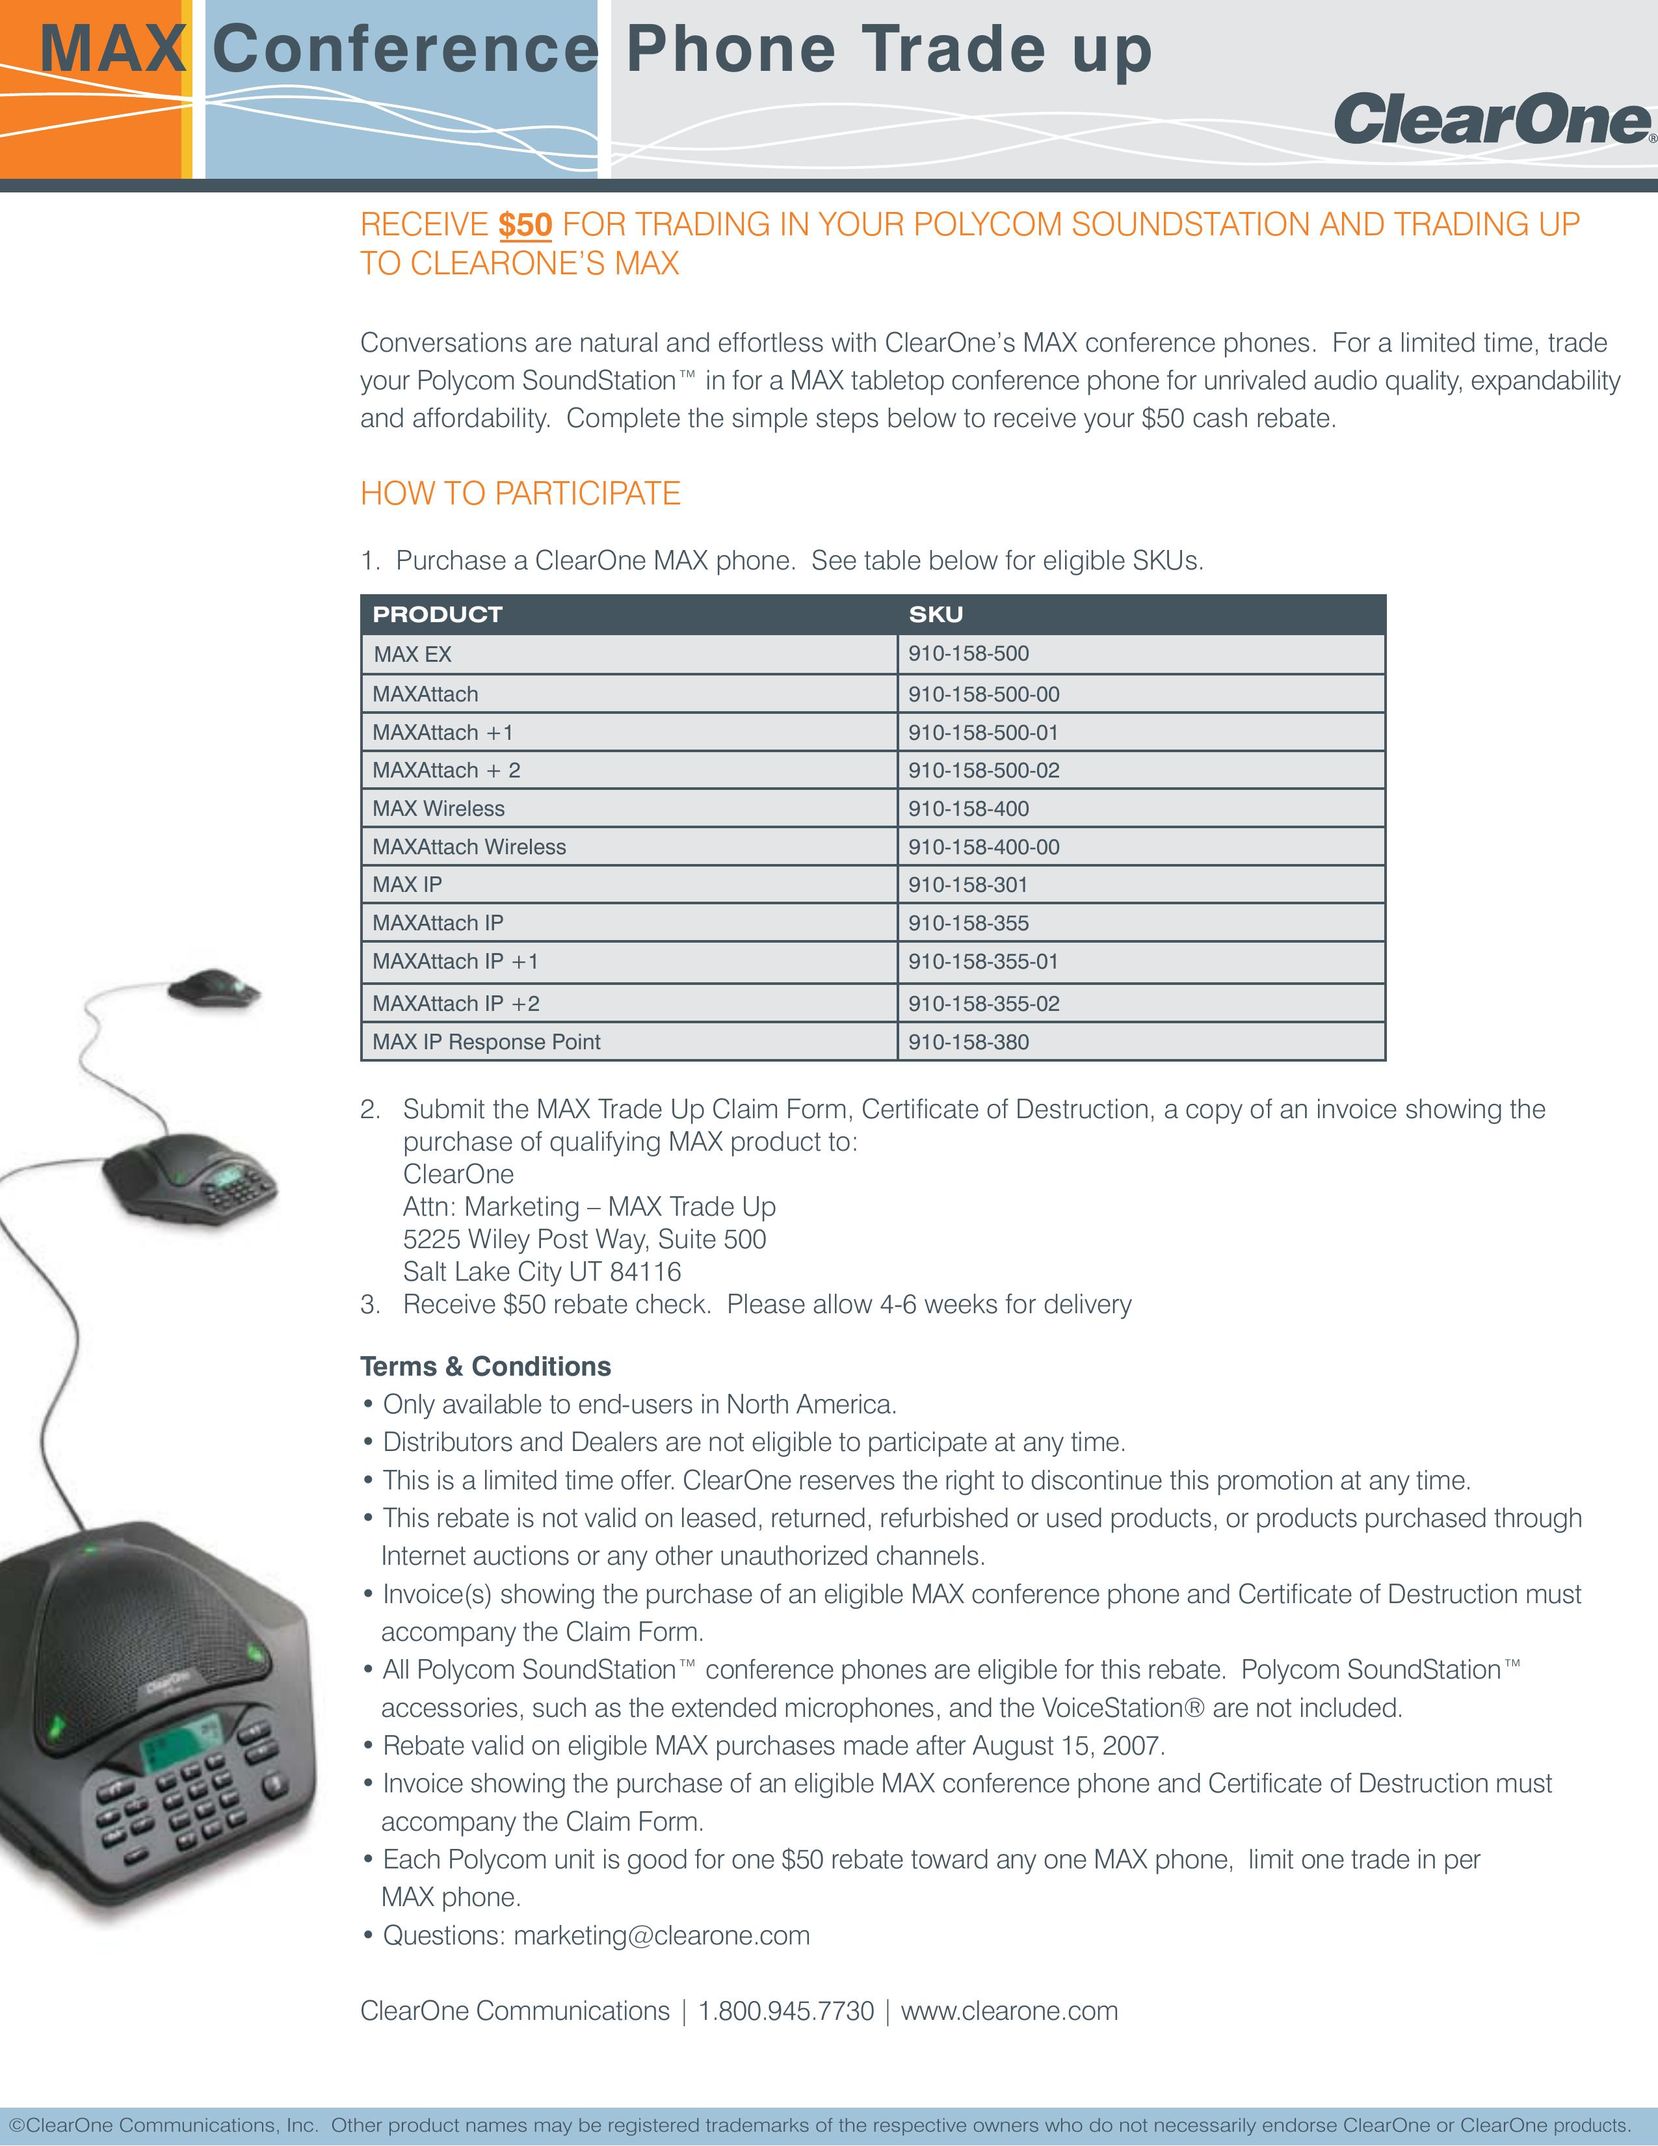 ClearOne comm MAXAttach IP +2 Conference Phone User Manual